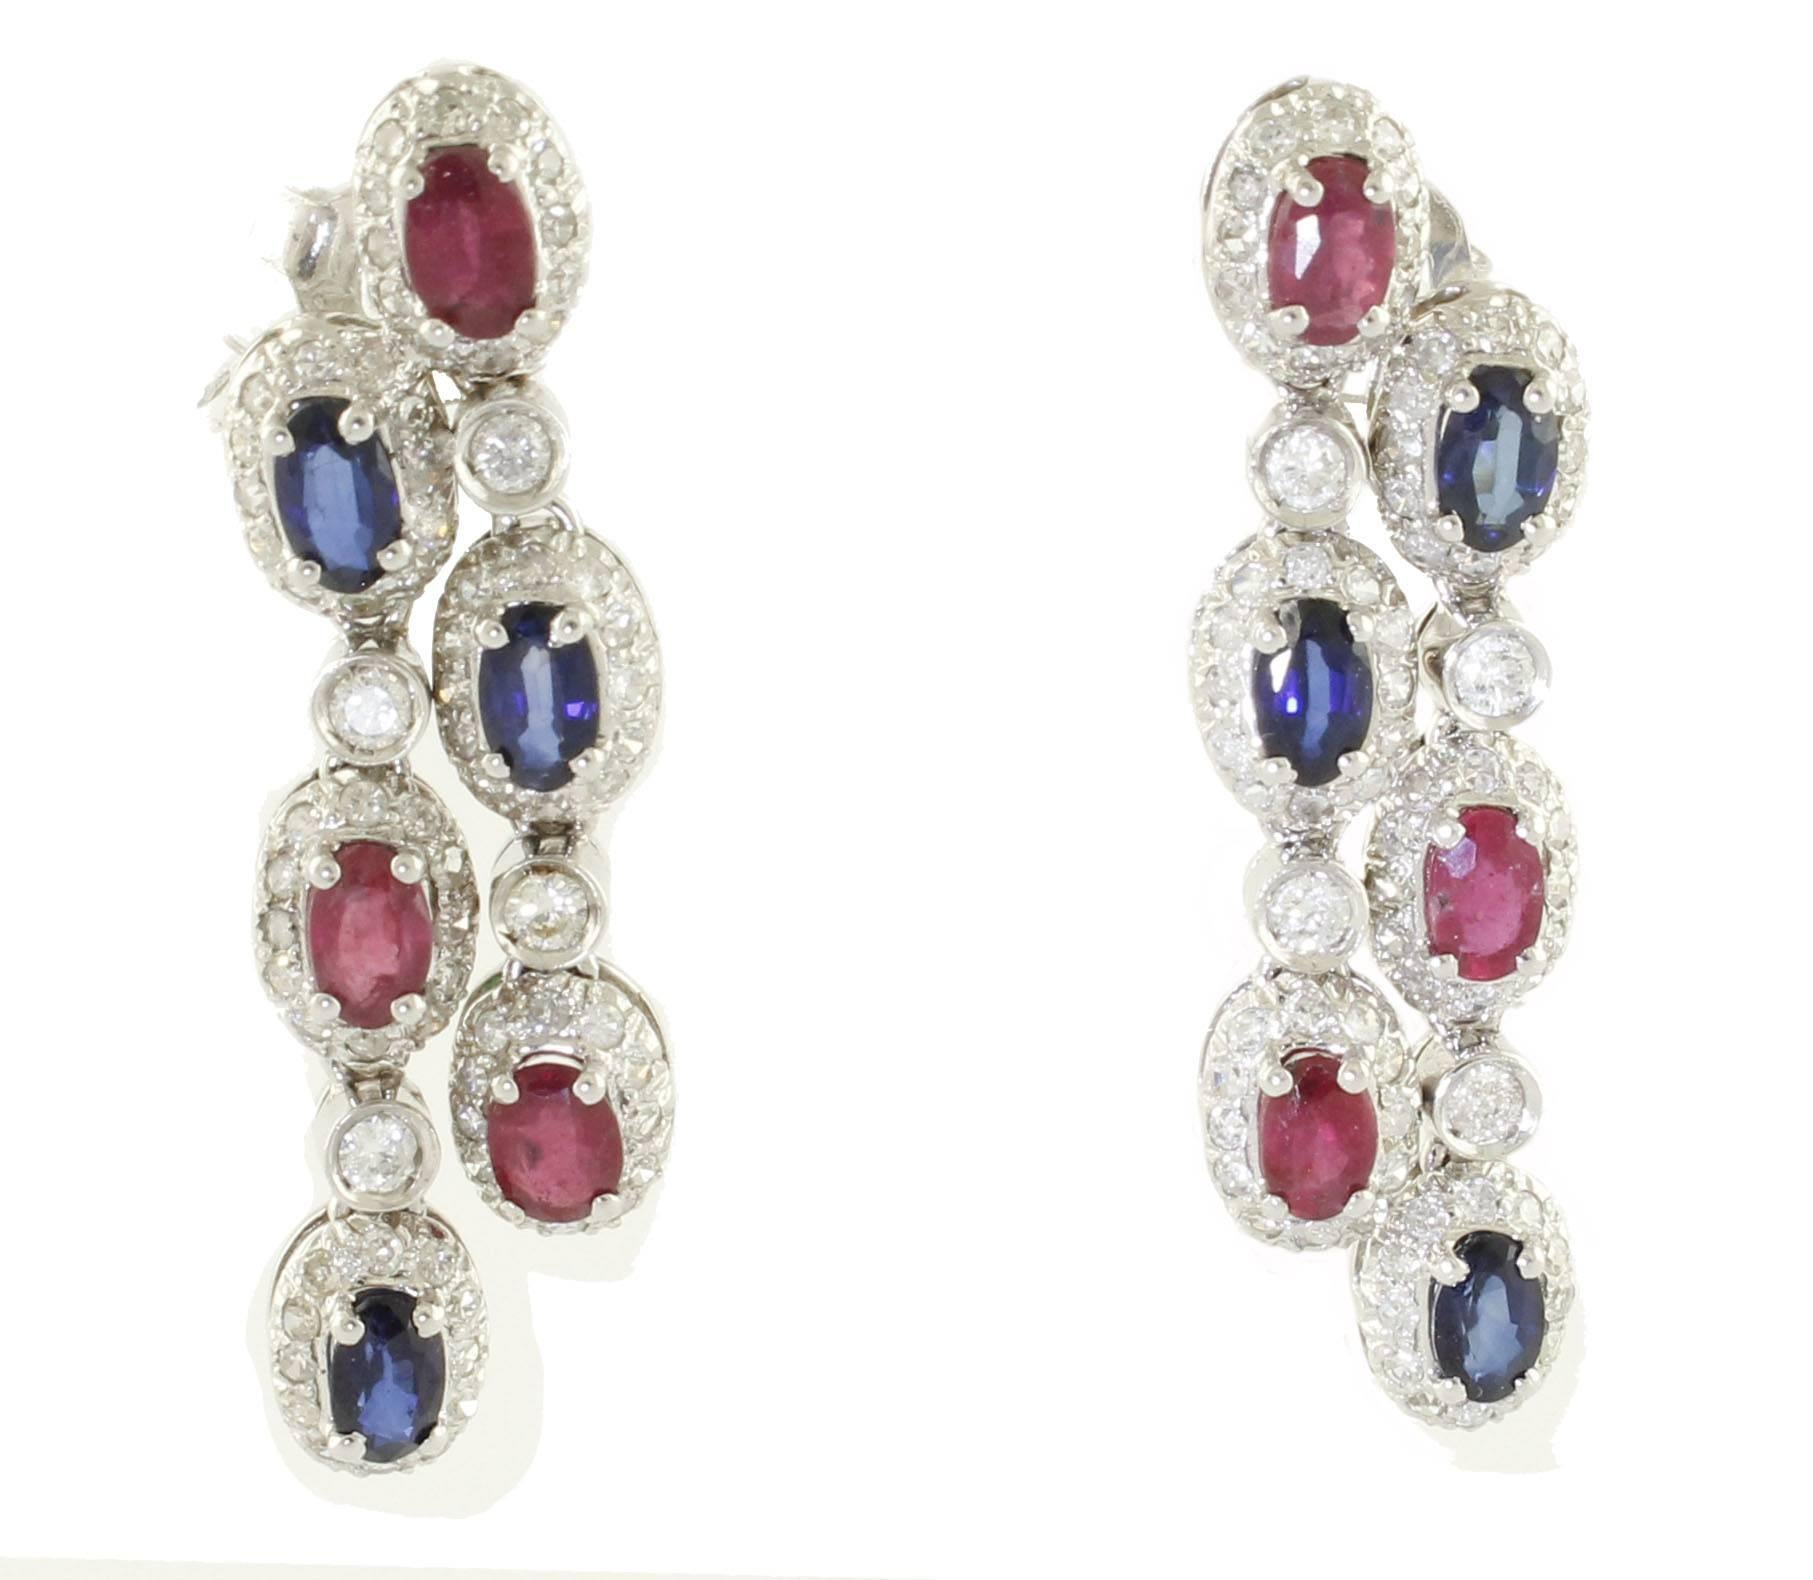 Fantastic 14 kt white gold dangle earrings, studded with rubies and sapphires from ct 4.23, and surrounded by 1.82 ct diamonds. Total weight g 8.20.
Diamonds ct 1.82
Rubies, Sapphires ct 4.23
Total weight g 8.20
R.F + ouir

For any enquires, please